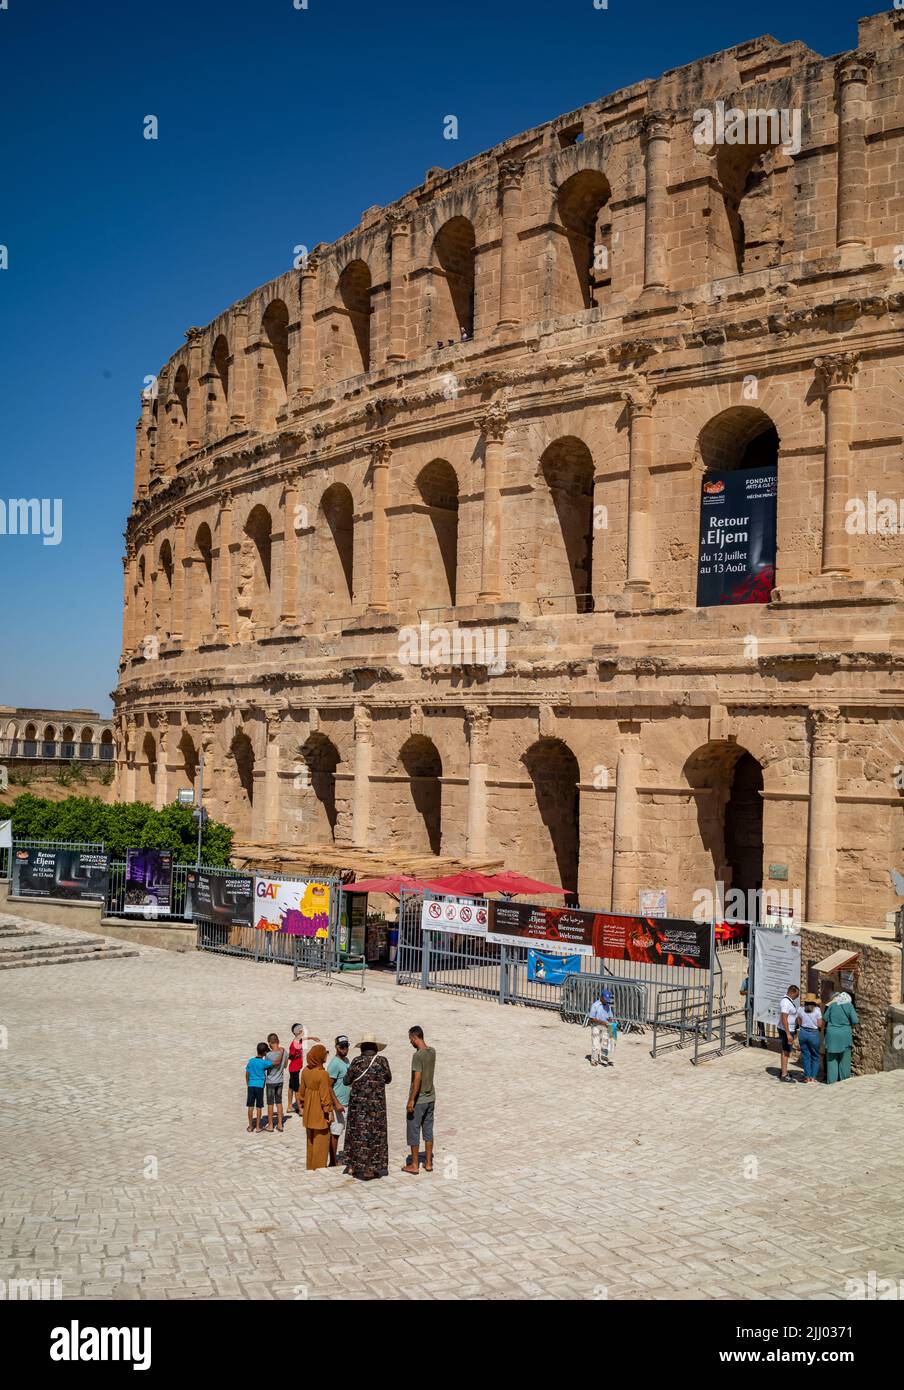 A group of tourists wait to visit the Roman amphitheatre in El Jem, Tunisia. Stock Photo